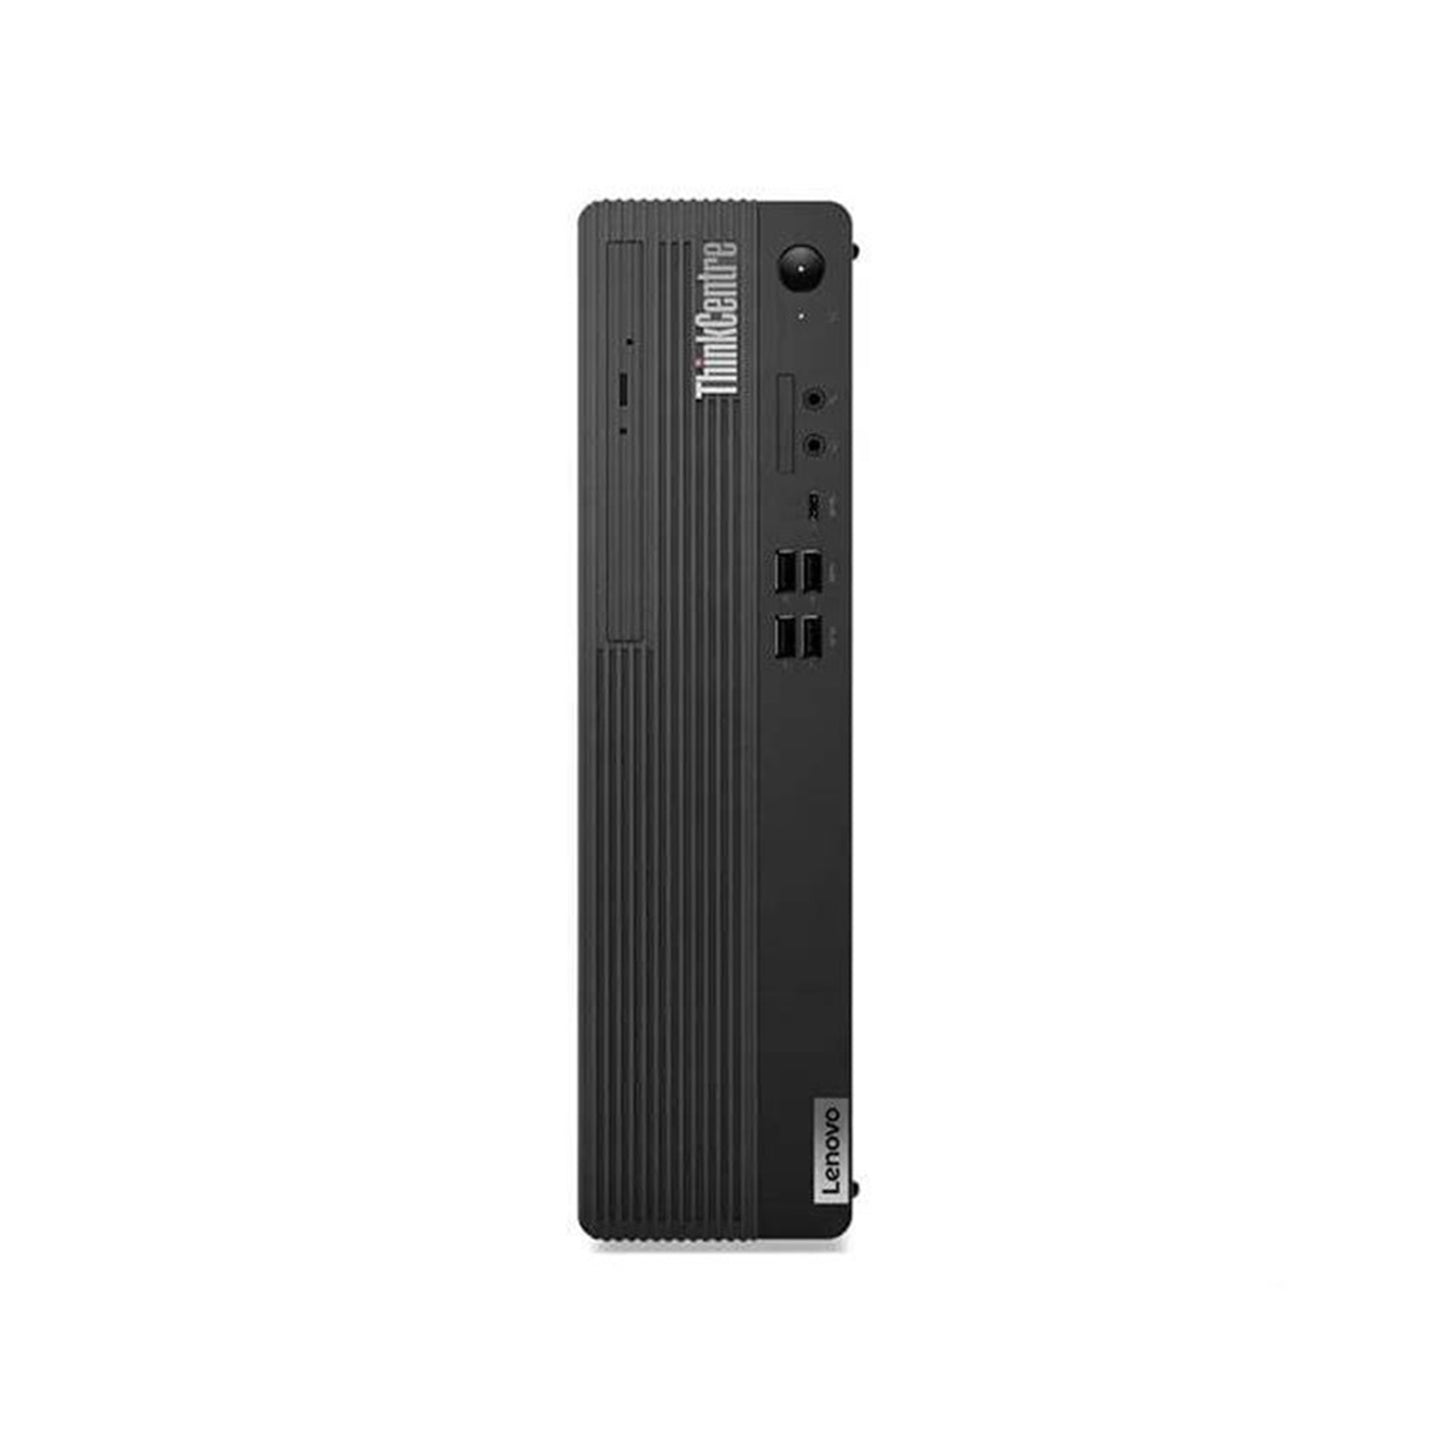 Lenovo ThinkCentre M80s Small Form Factor Desktop PC, Intel Core i5-10400 10th Gen, 8GB RAM, 512GB SSD, Windows 11 Home with Keyboard and Mouse